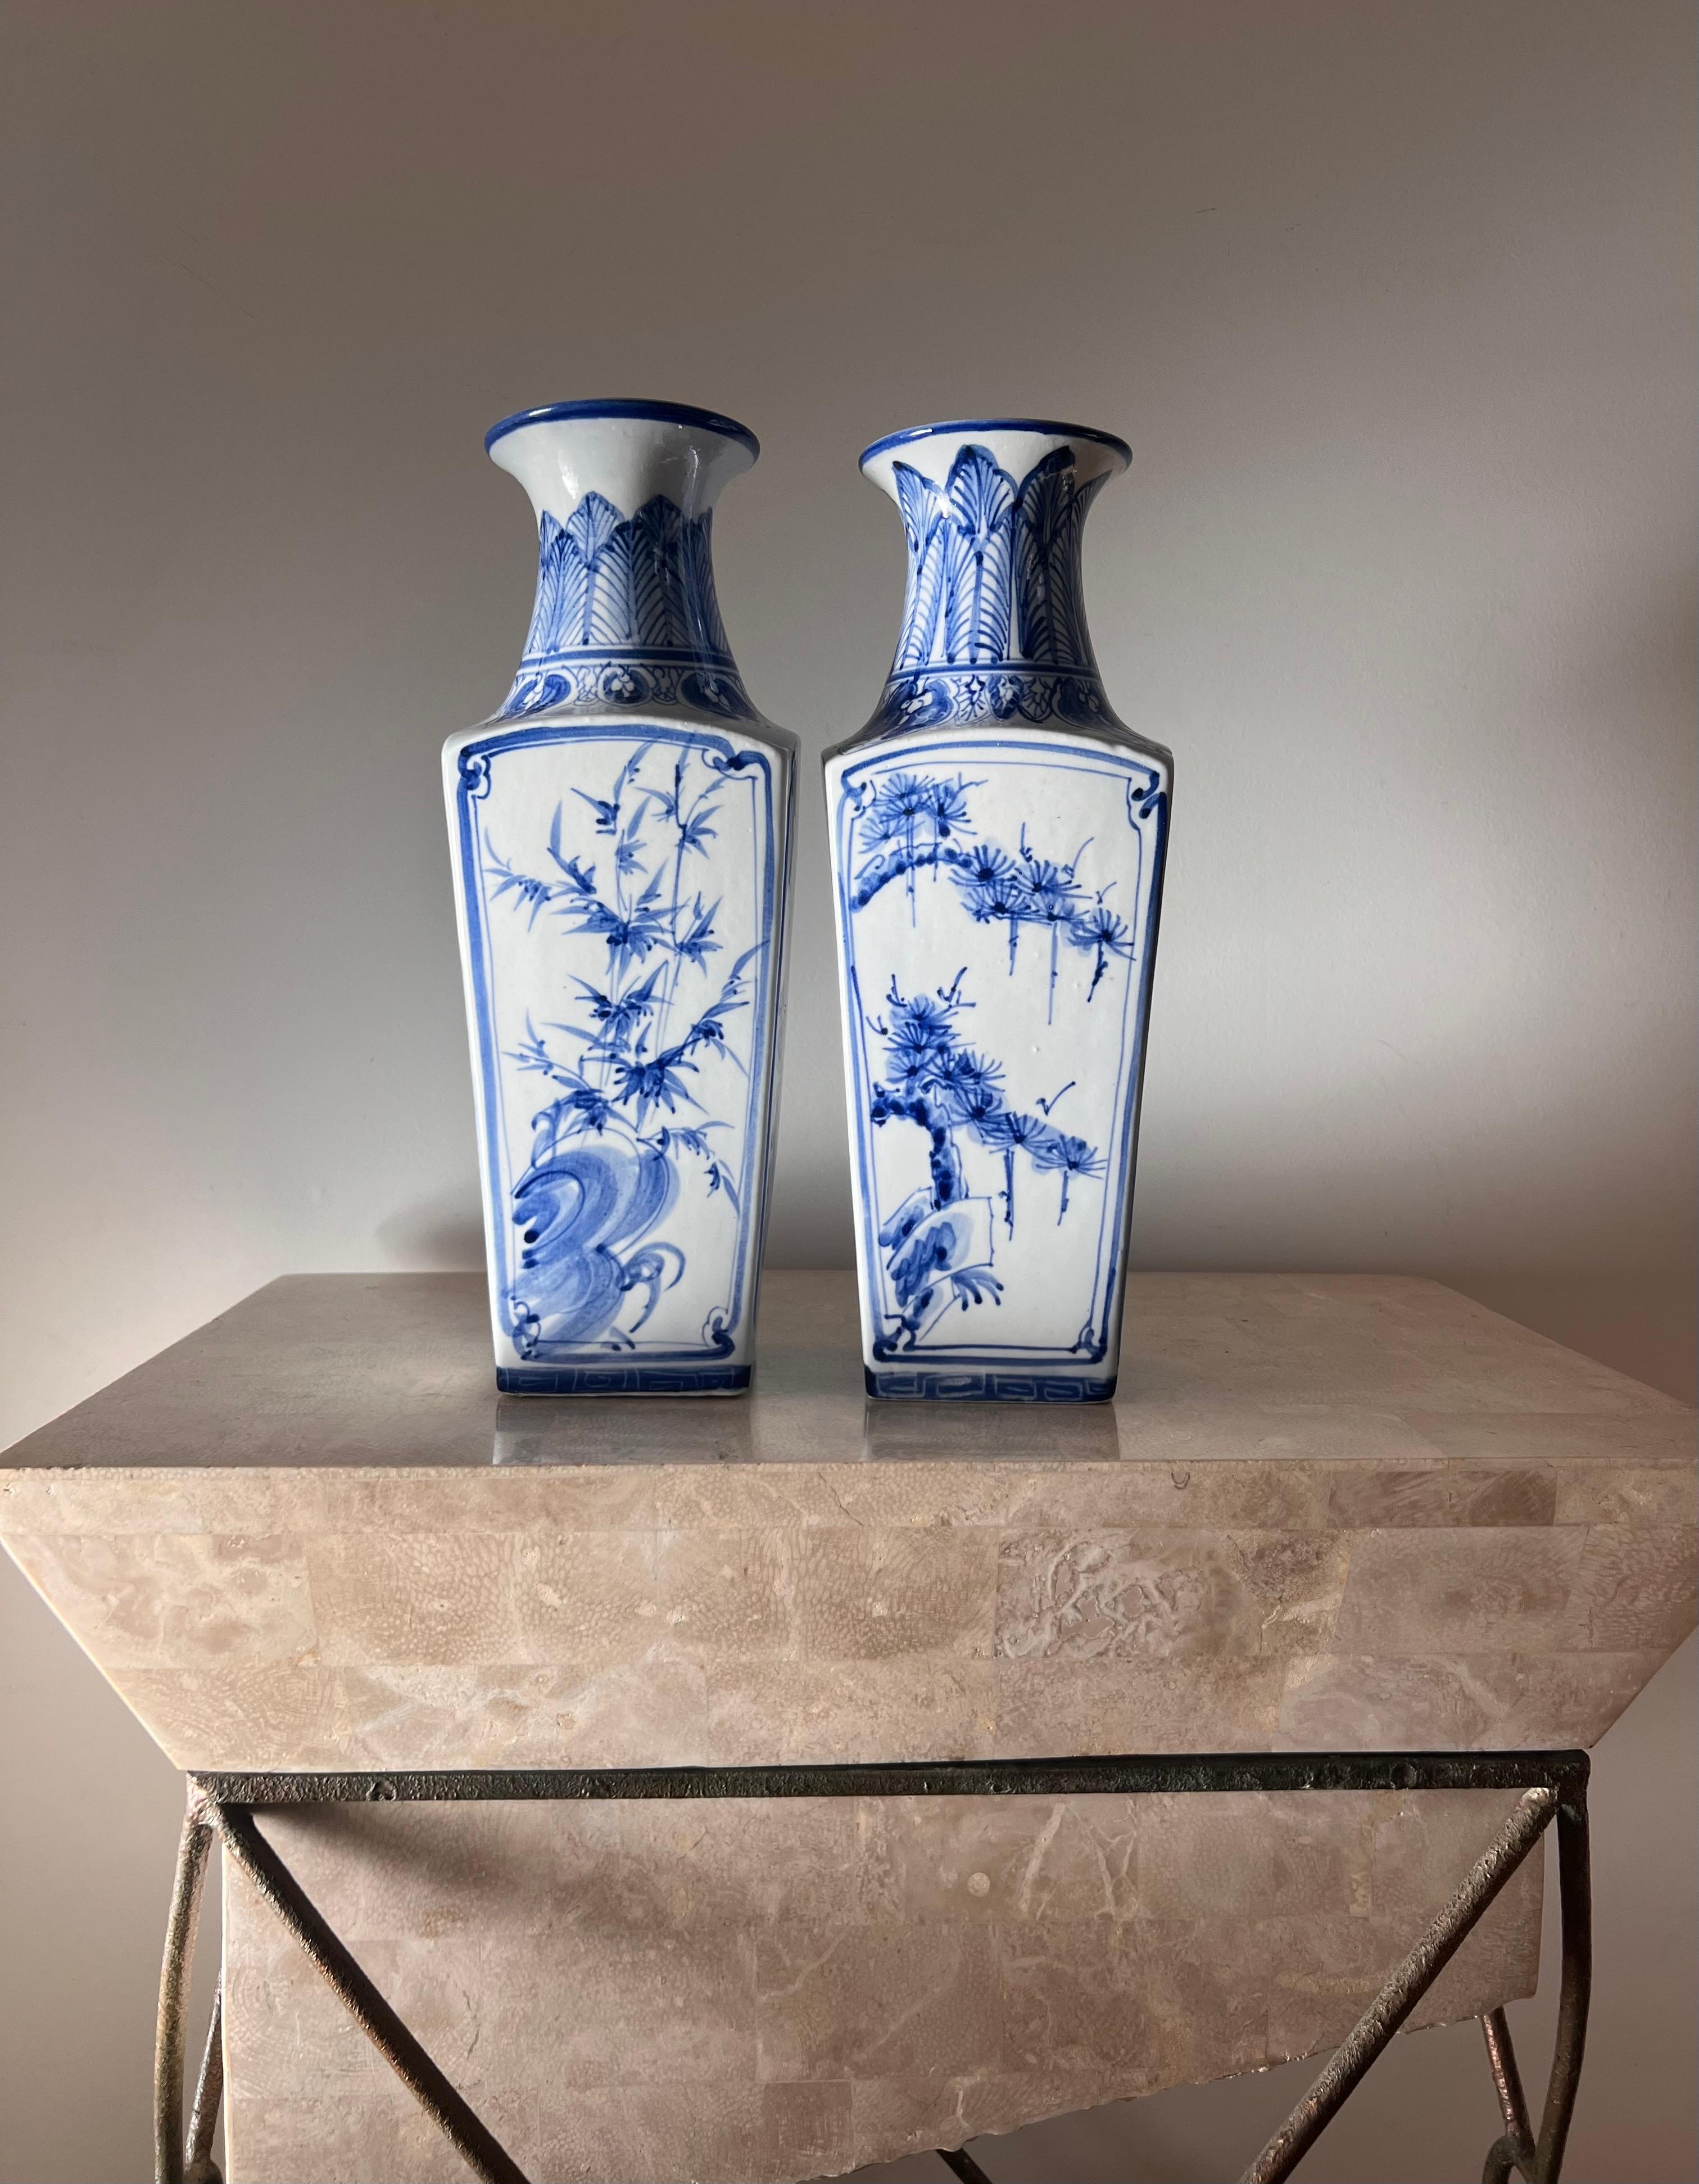 A pair of blue and white porcelain Chinese vases featuring motifs of fir trees, cherry blossoms, and other flora. I am uncertain about the era these are from, possibly late 19th century or early 20th but it could be earlier. They are unsigned and